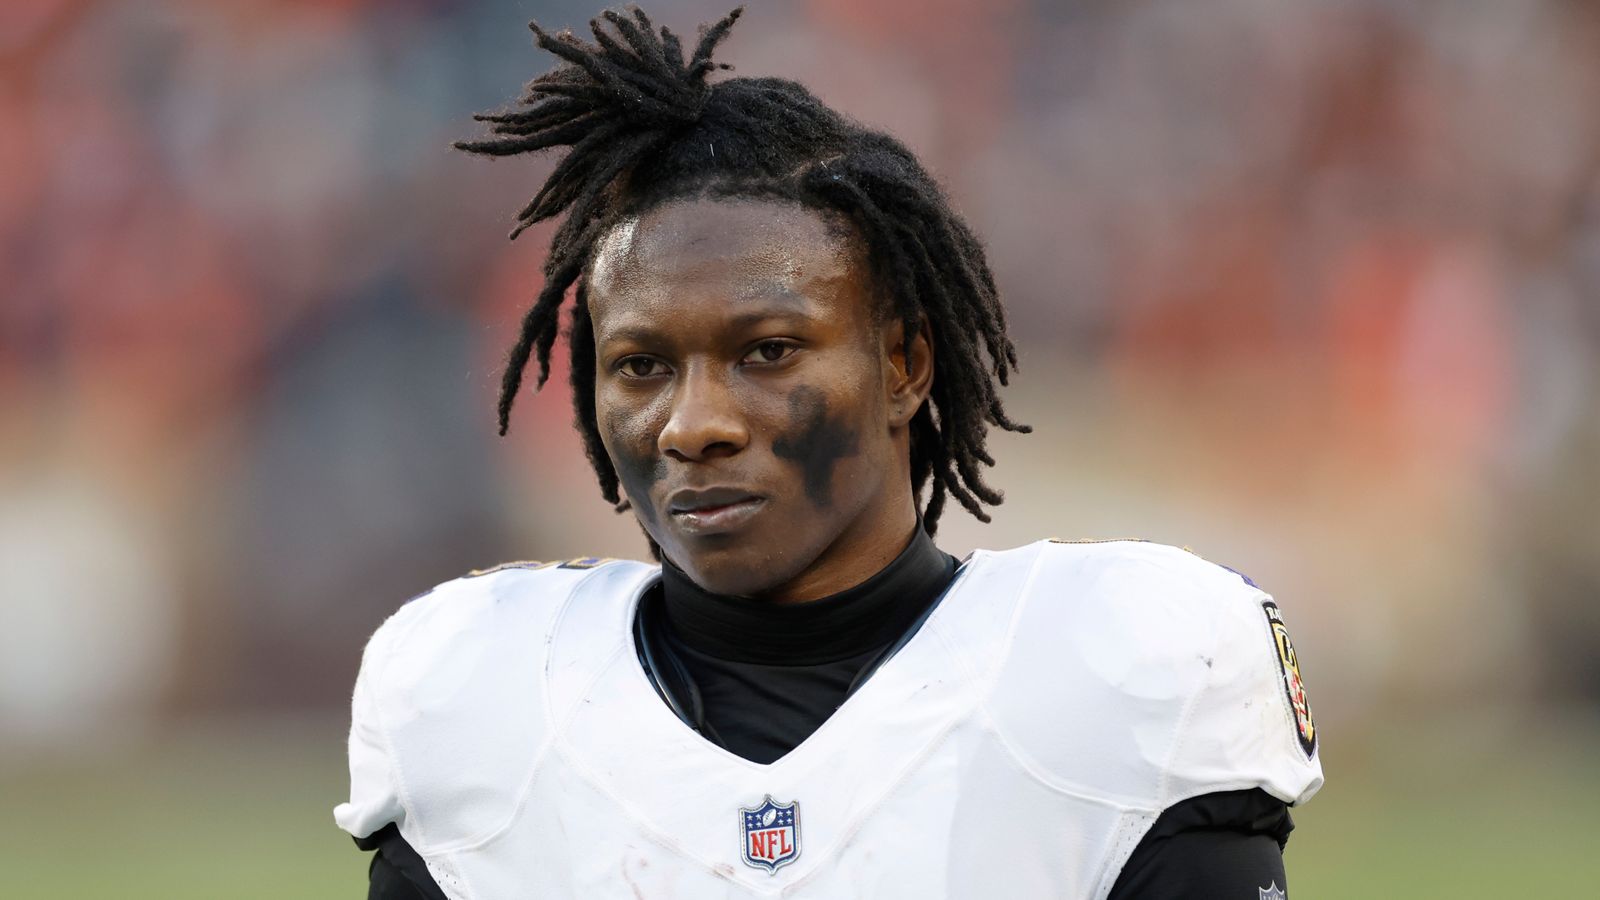 Arizona Cardinals’ wide receiver Marquise ‘Hollywood’ Brown arrested for ‘criminal speeding’